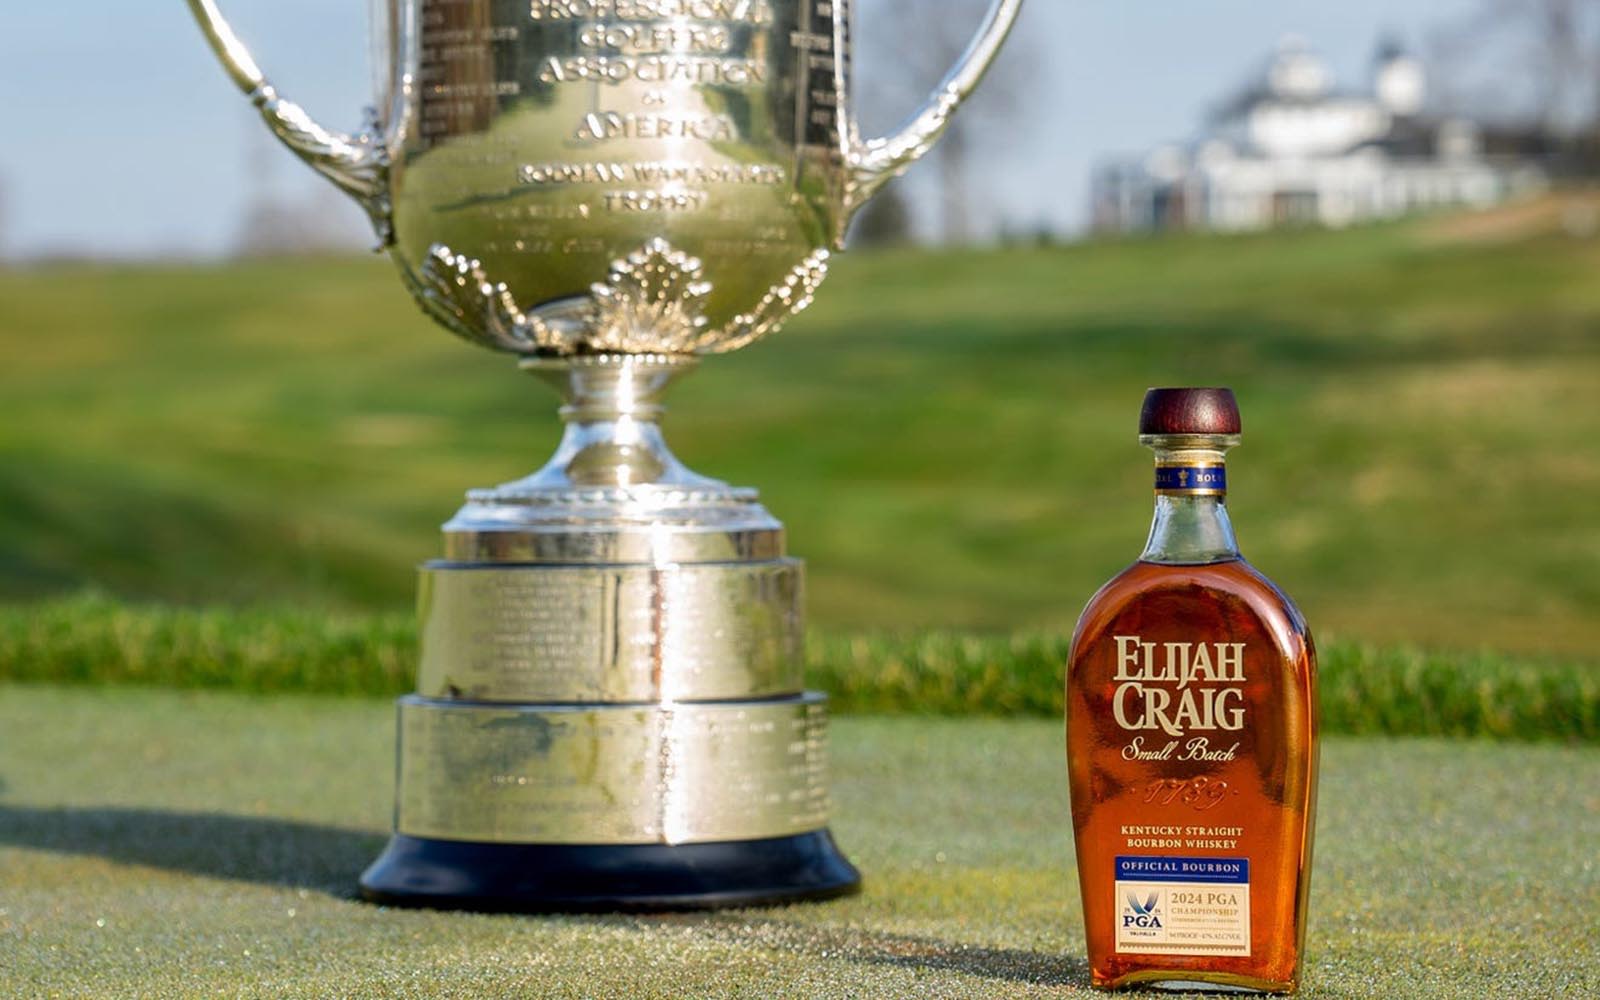 Elijah Craig releases special small batch bourbon in honor of 2024 PGA Championship